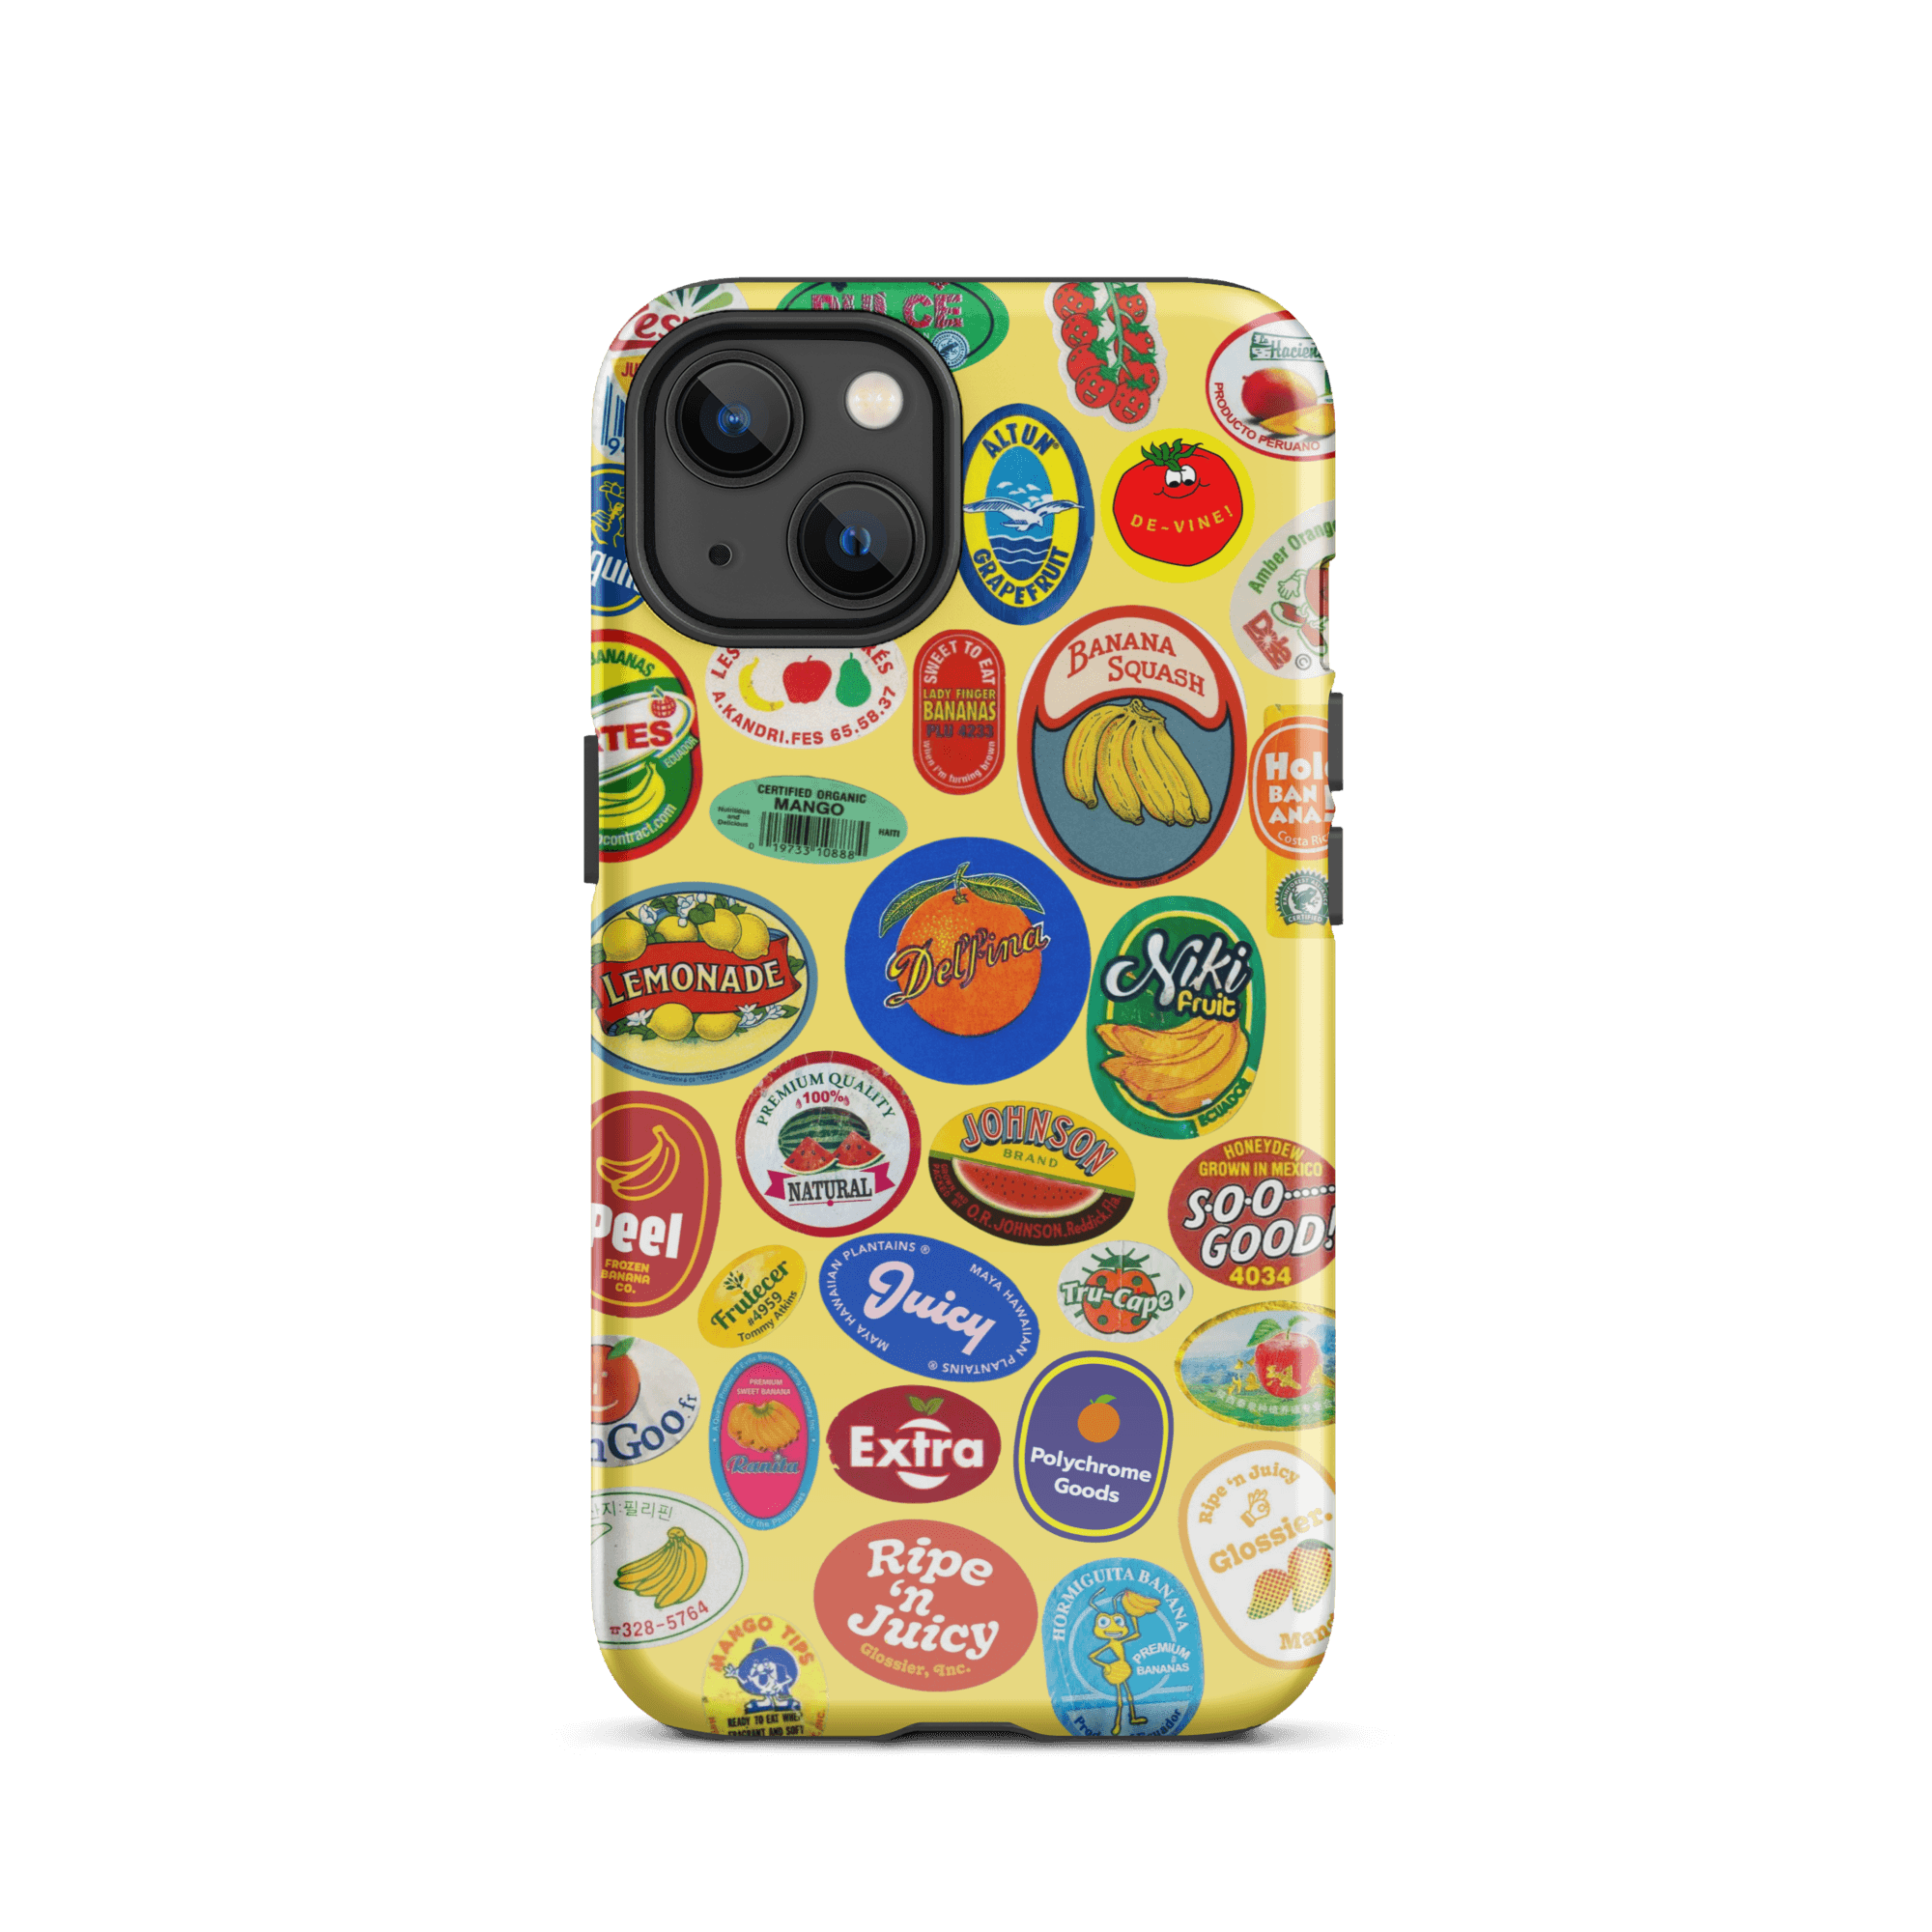 Fruit Stickers 🍊🍒🍋🍍🍏 Phone Case for iPhone (Yellow Background) - Polychrome Goods 🍊